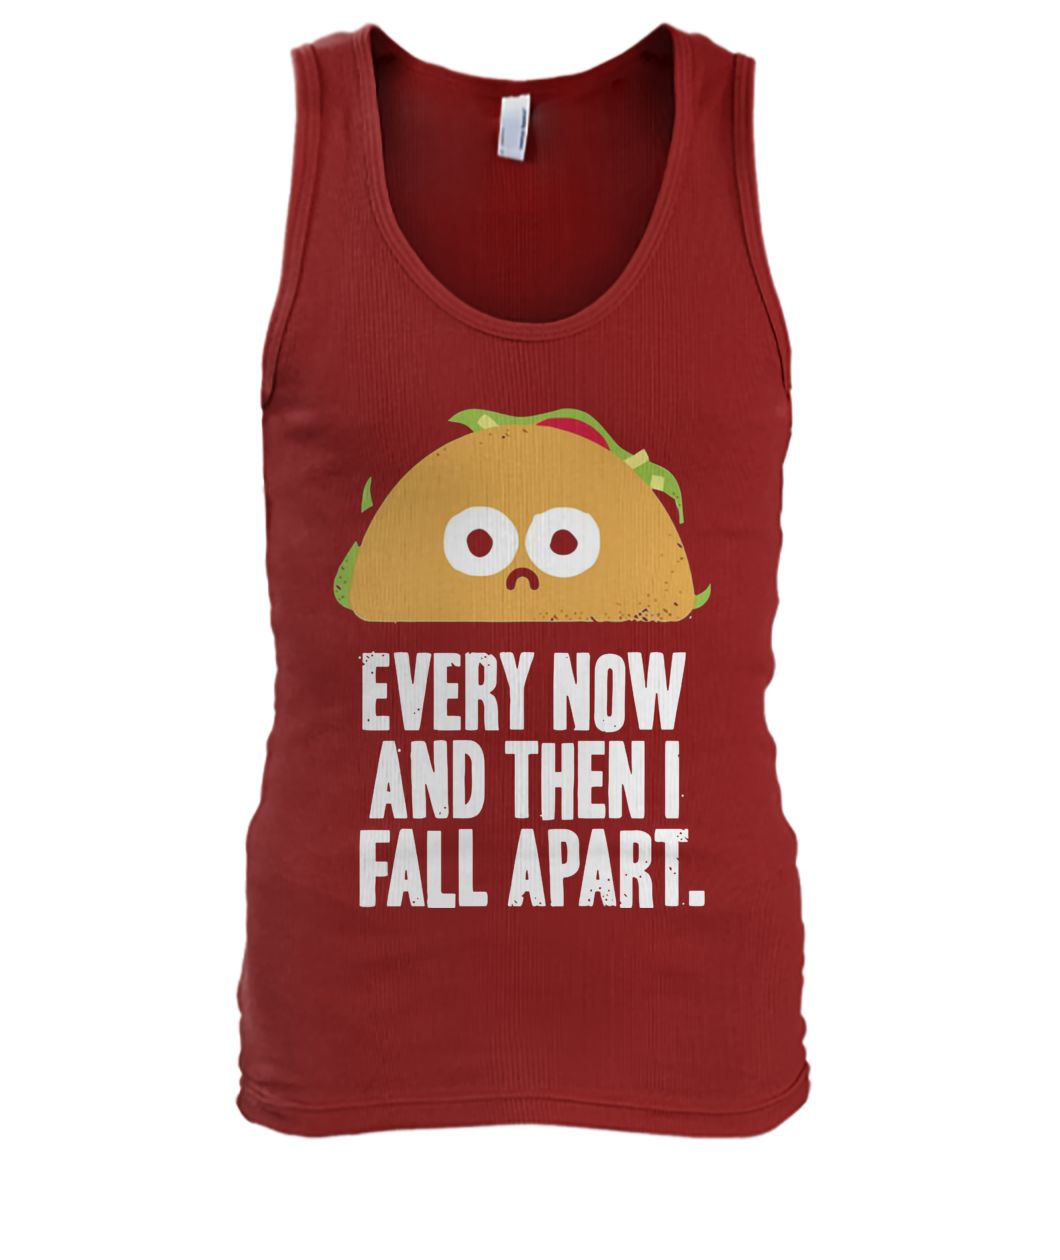 Every now and then I fall apart taco men's tank top